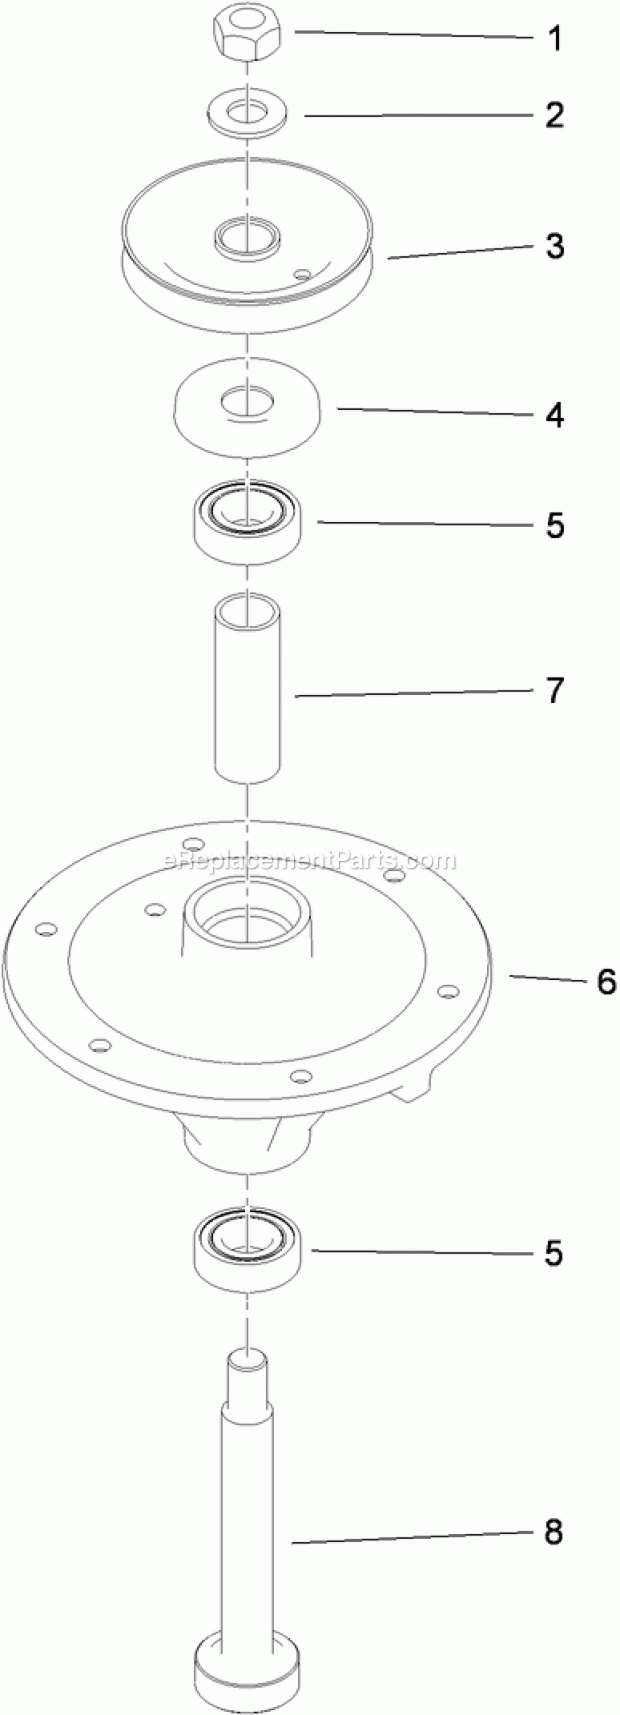 Toro 74536TE (310000001-310999999) Grandstand Mower, With 102cm Turbo Force Cutting Unit, 2010 Spindle Assembly No. 117-7640 Diagram